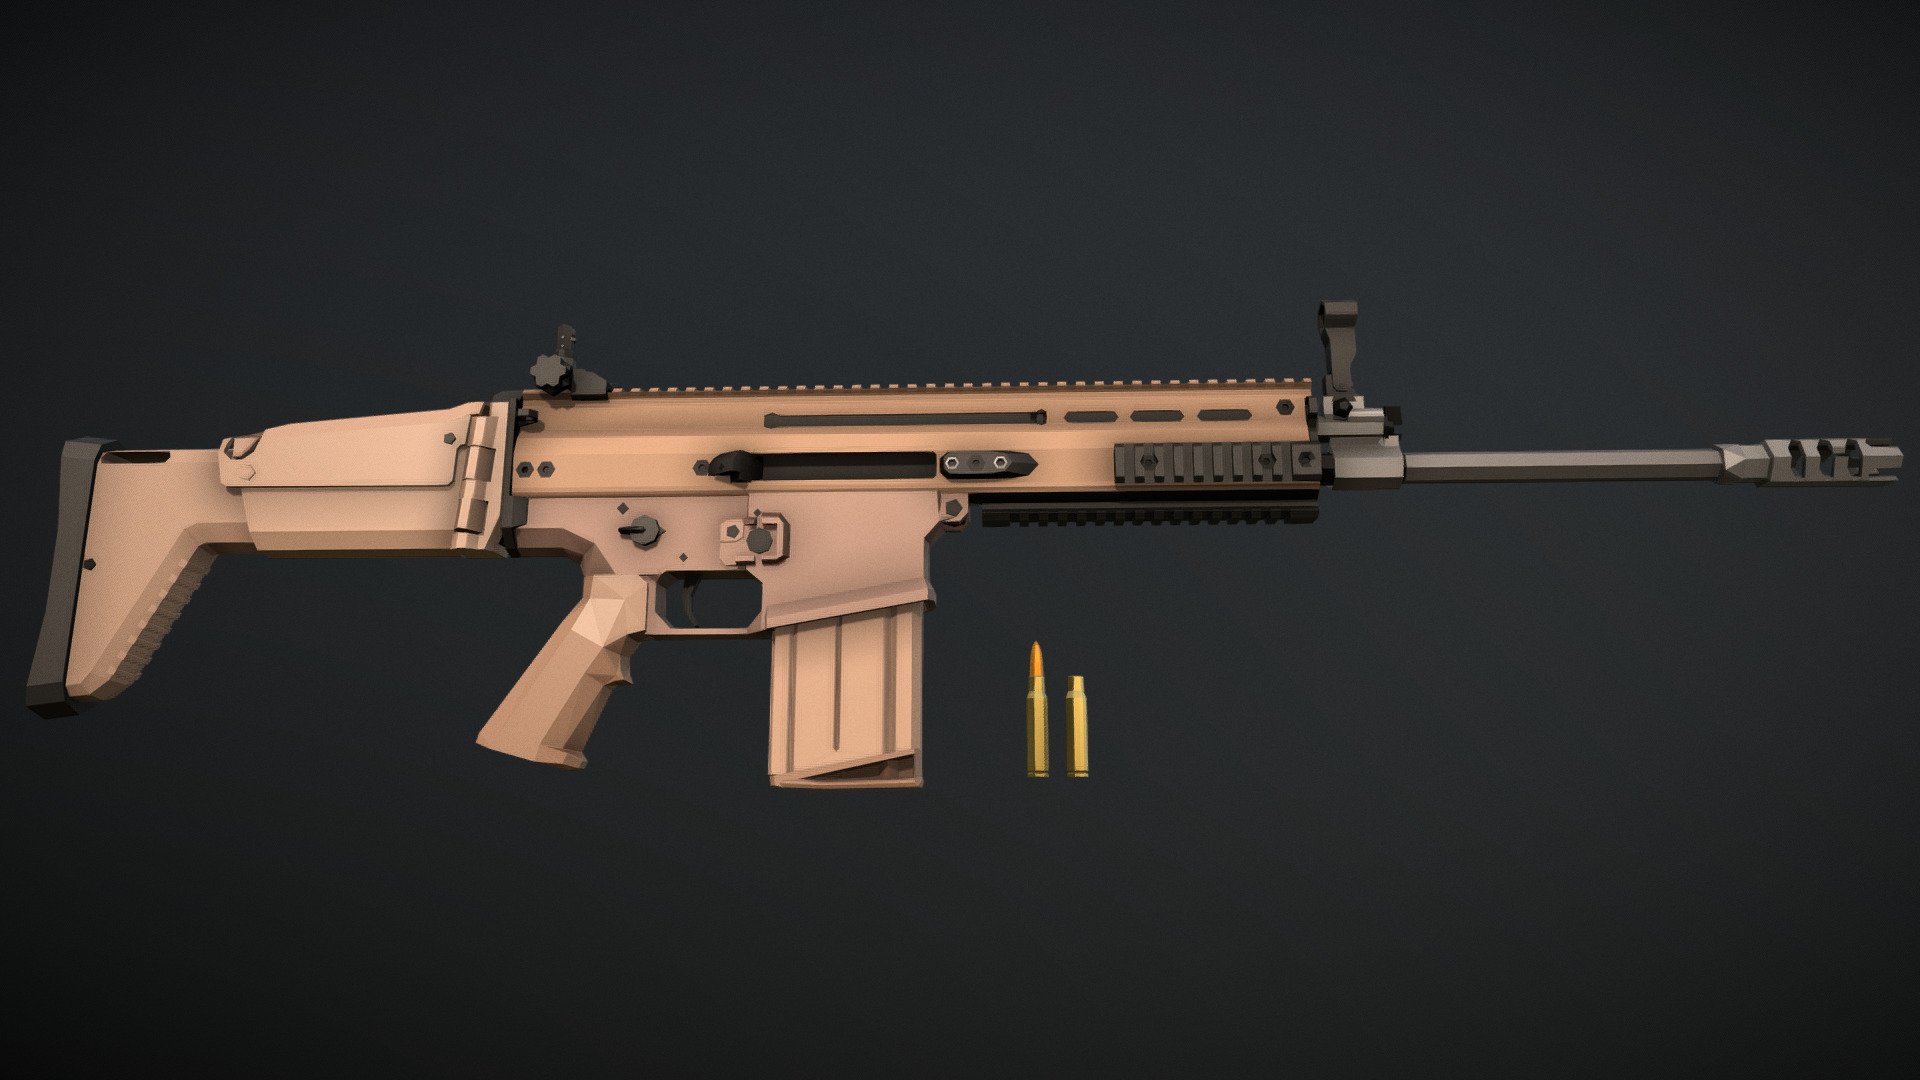 The SCAR-H, designated Mk17 mod0 in the US military, is a battle rifle made by FN Belgium, chambered in 7.62x51mm NATO. The rifle was created for a US military trial, and has since been adopted by many militaries, being used both by special forces as well as SWAT 3d model